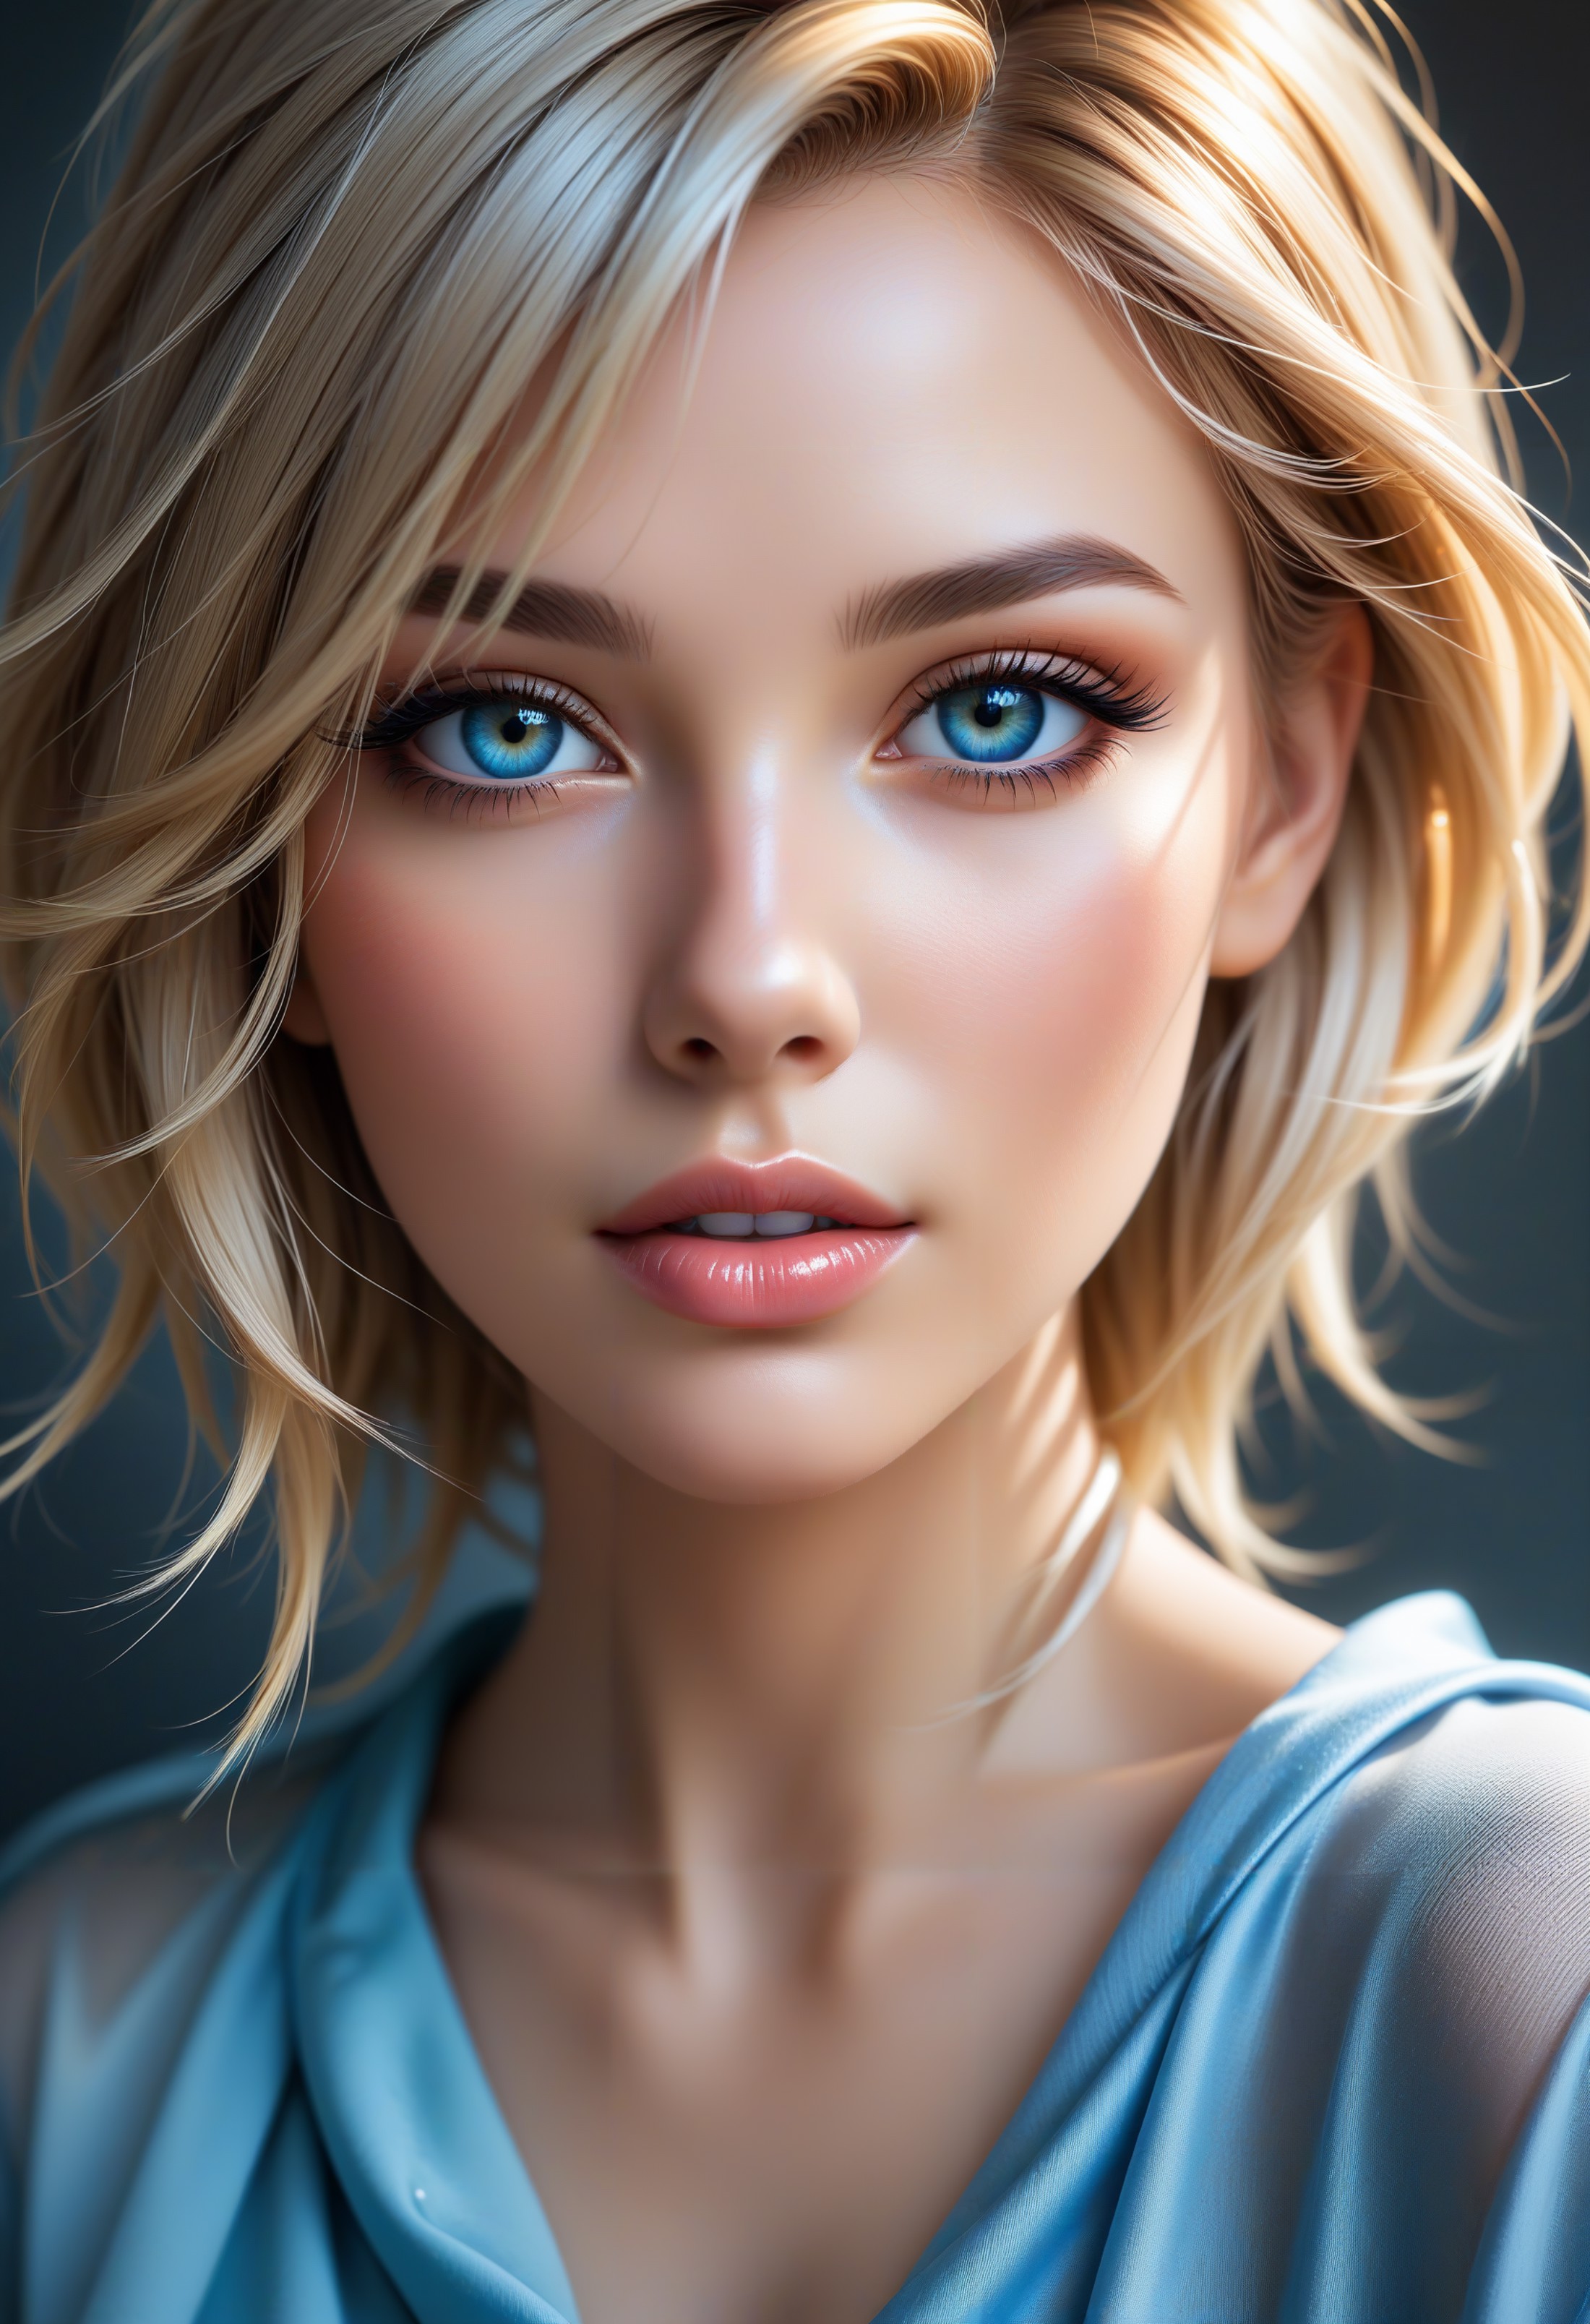 anime artwork soft portrait of a beautiful scandinavian woman, face close-up, smooth hair elegantly draped around her neck...